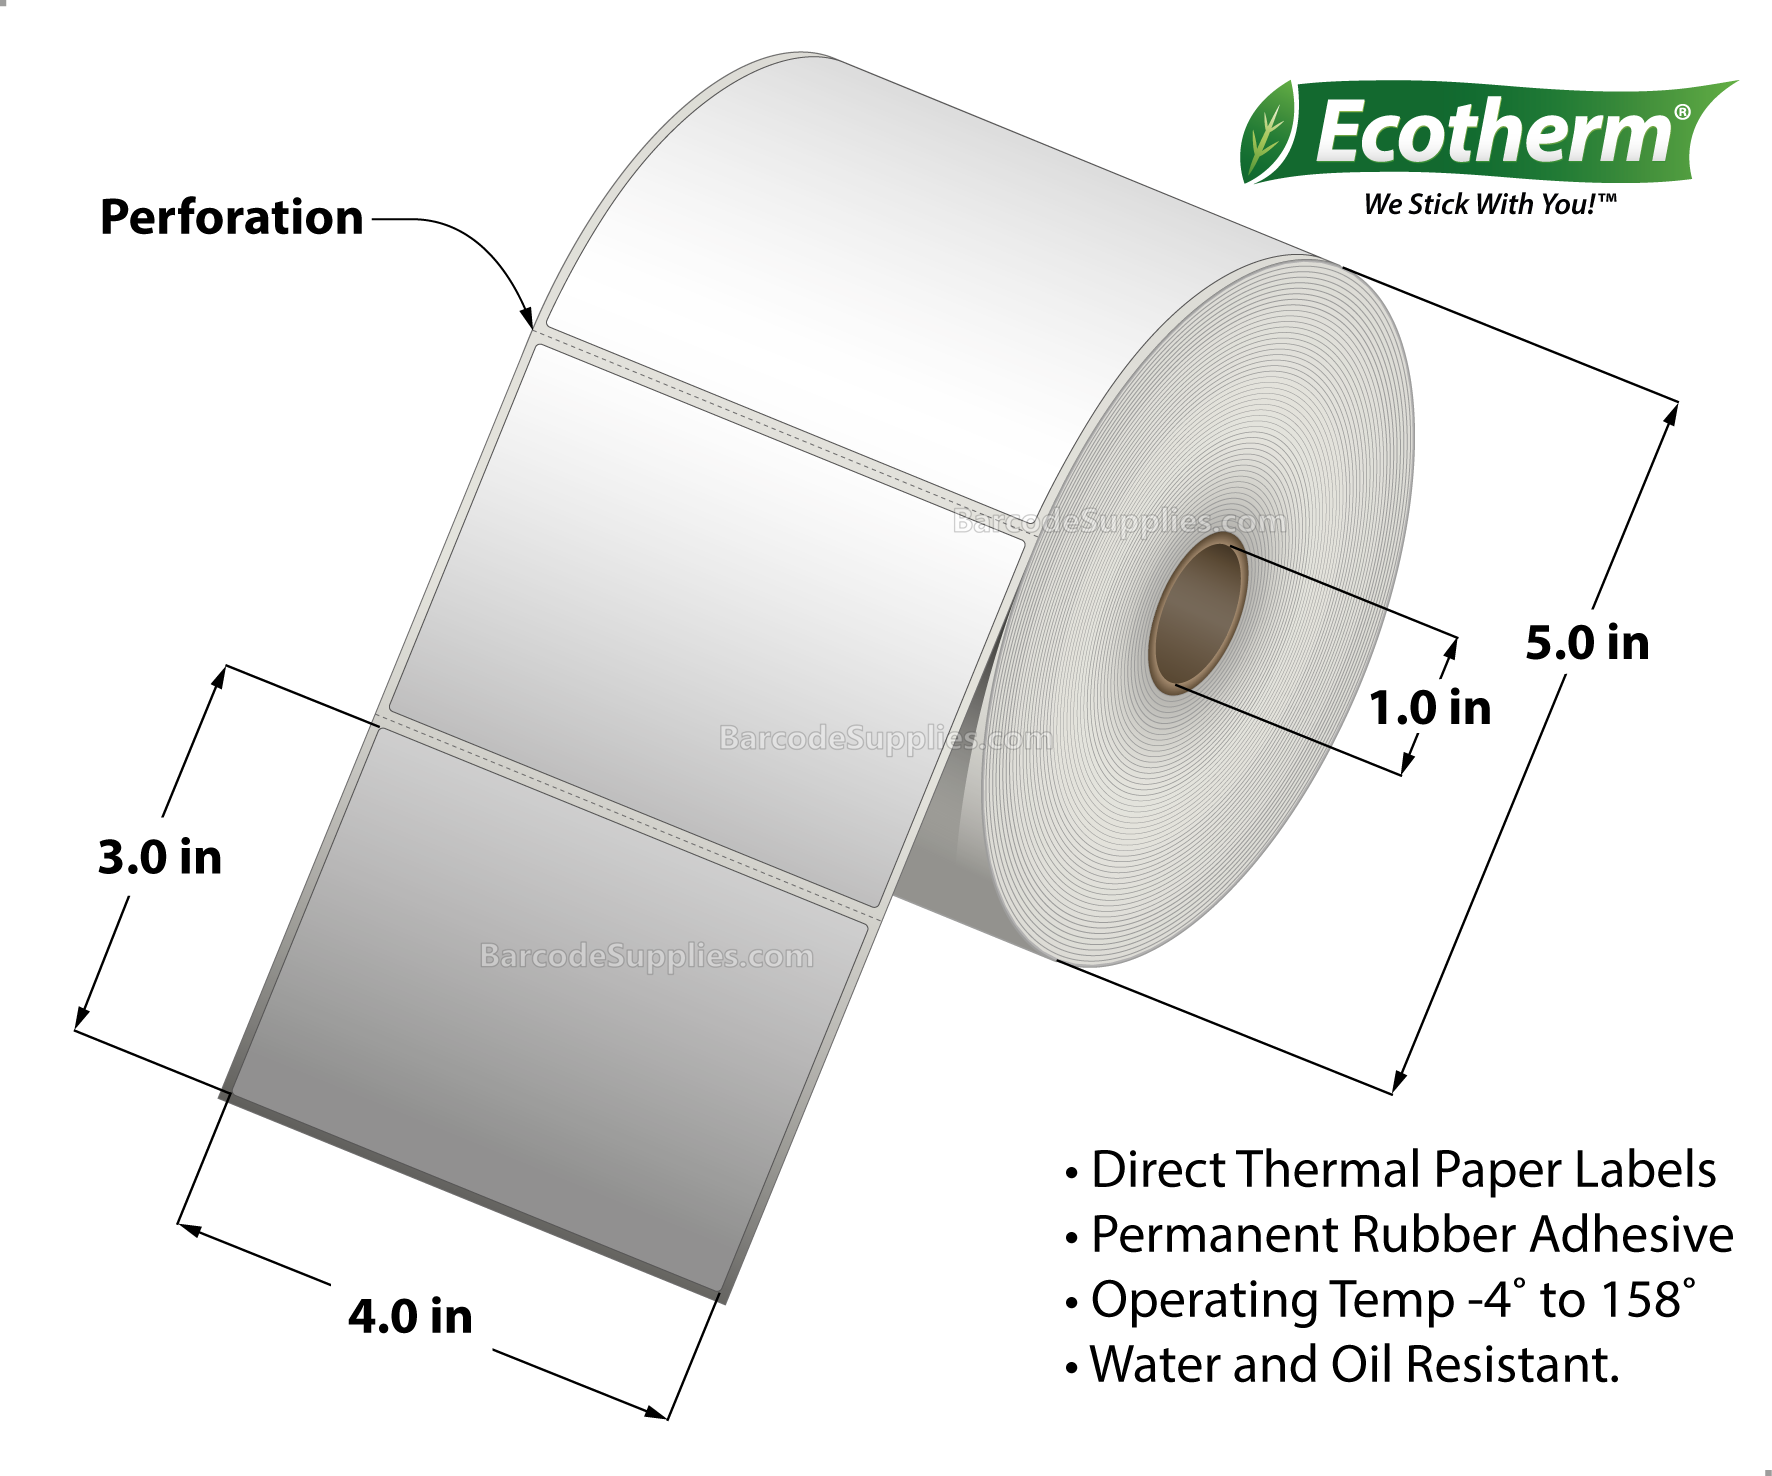 4 x 3 Direct Thermal White Labels With Rubber Adhesive - Perforated - 930 Labels Per Roll - Carton Of 6 Rolls - 5580 Labels Total - MPN: ECOTHERM15151-6